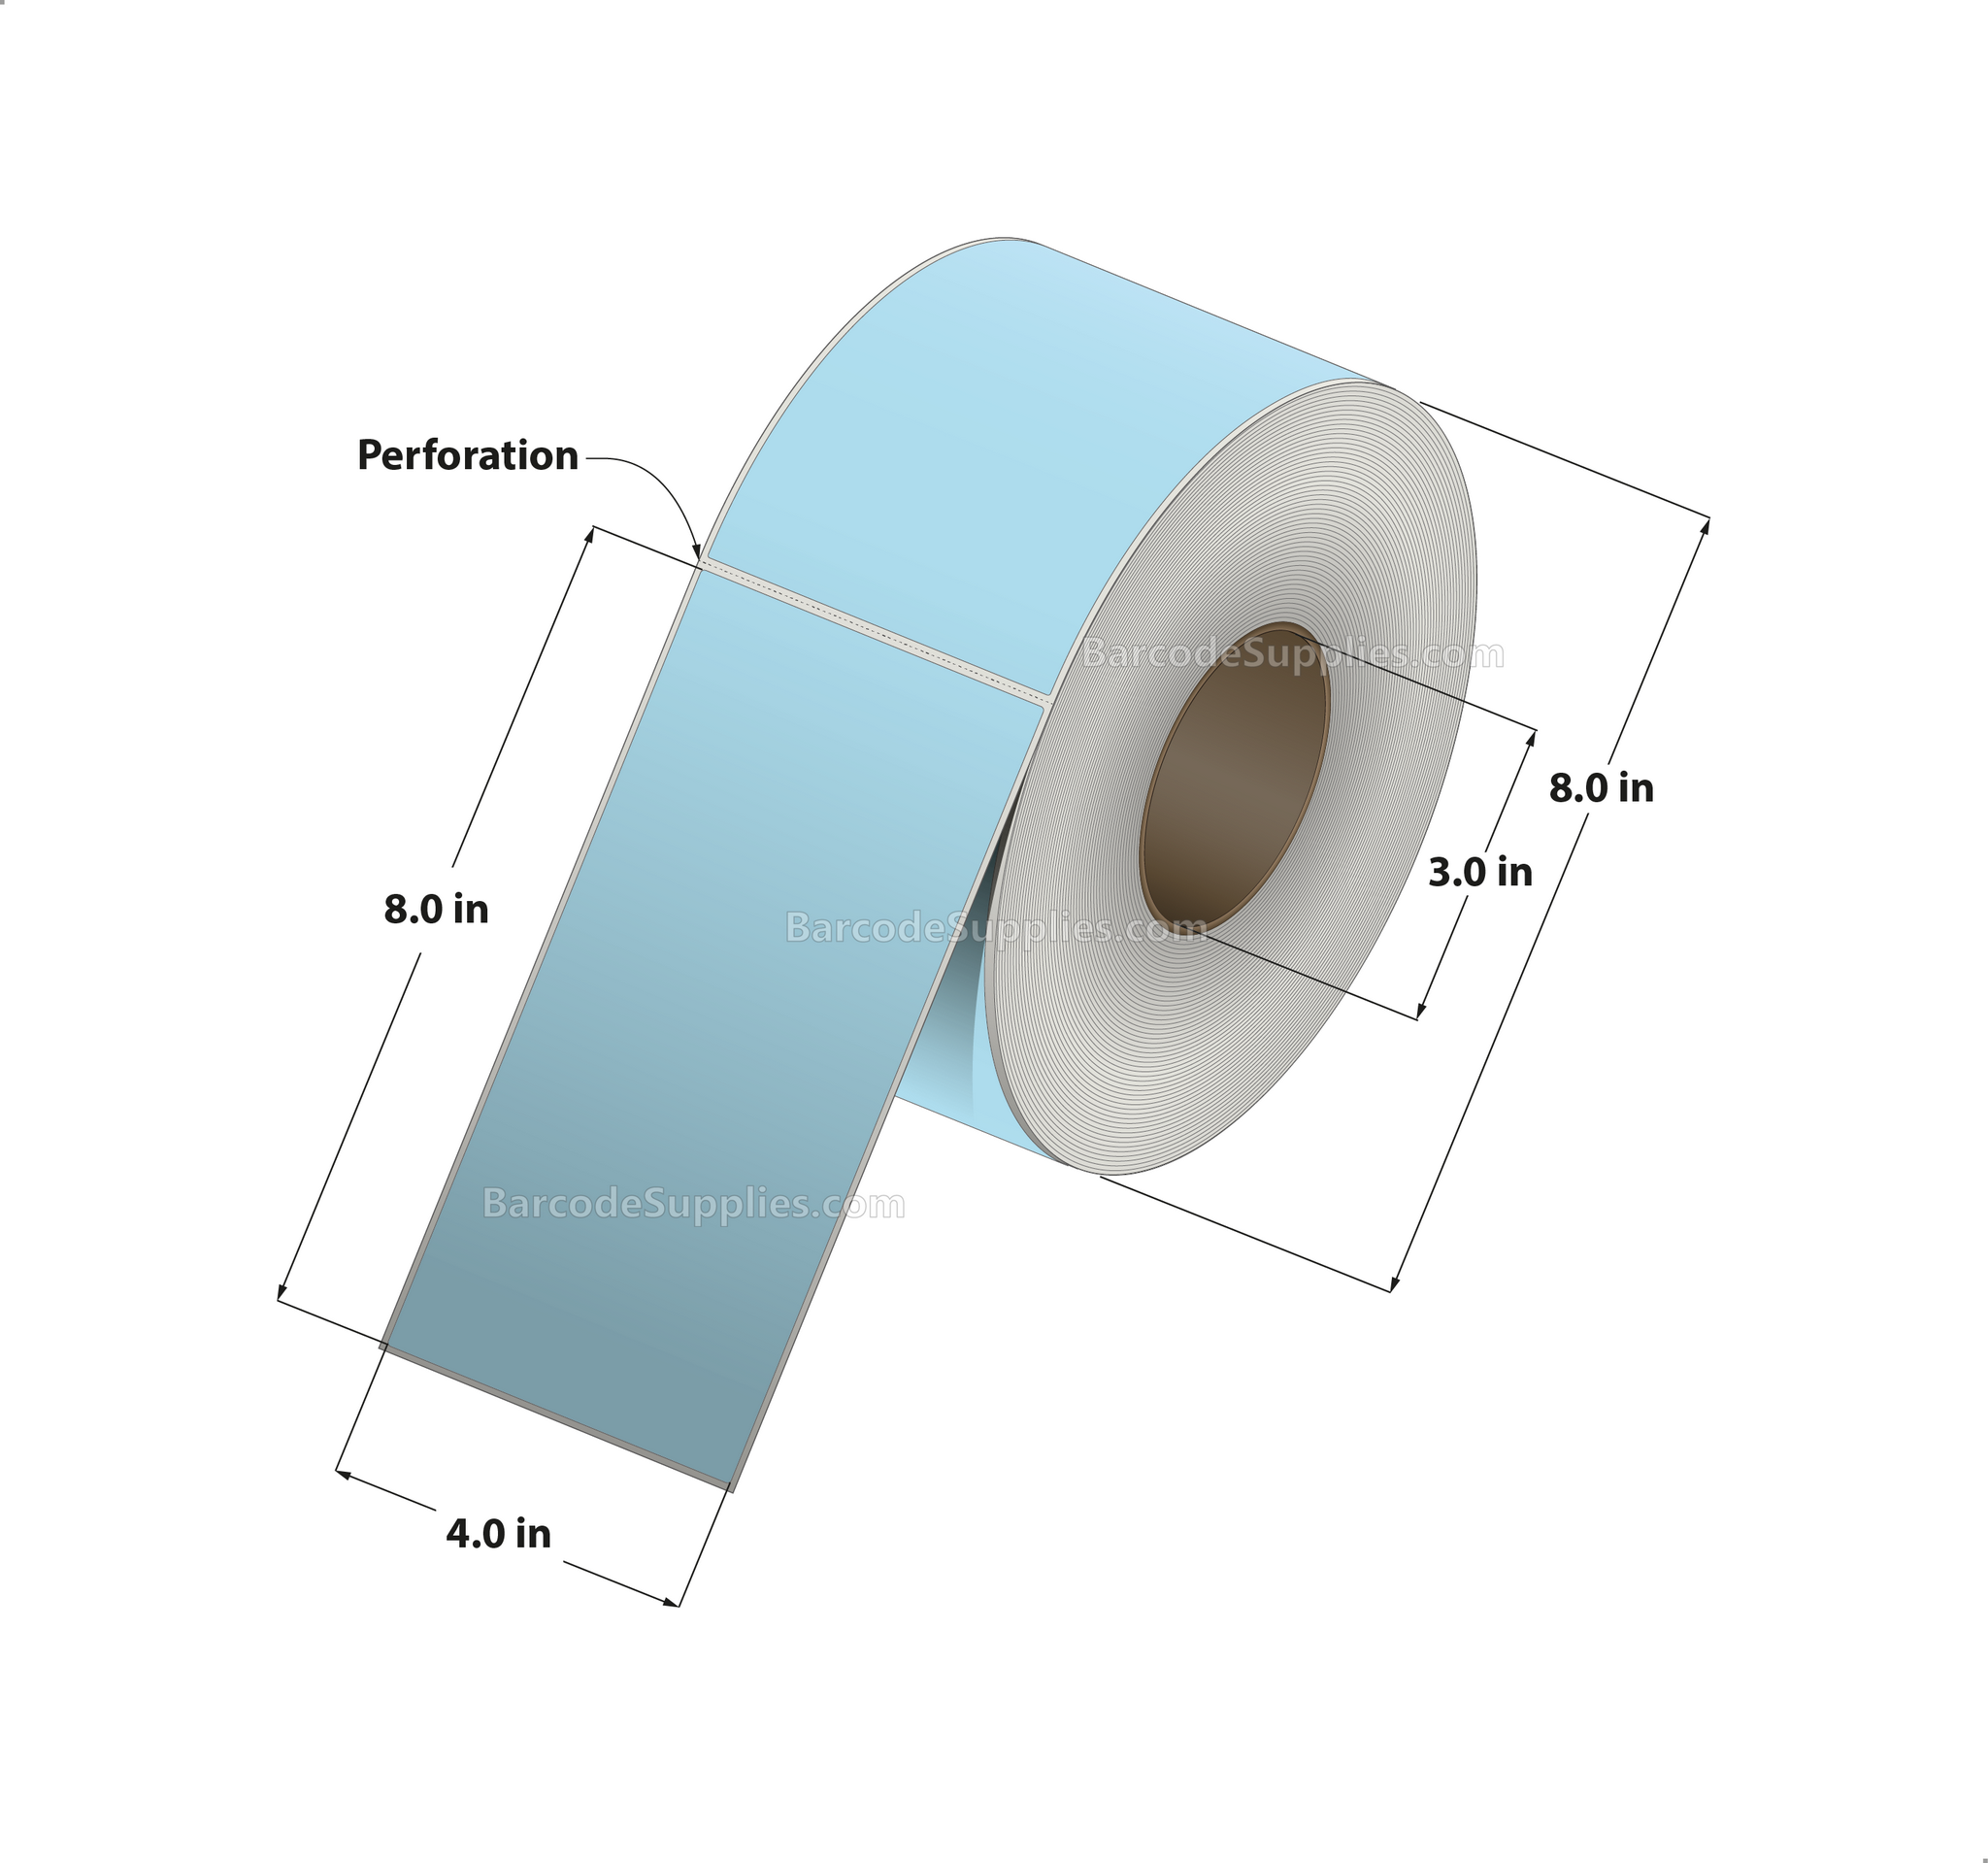 4 x 8 Thermal Transfer 290 Blue Labels With Permanent Adhesive - Perforated - 750 Labels Per Roll - Carton Of 4 Rolls - 3000 Labels Total - MPN: RFC-4-8-750-BL